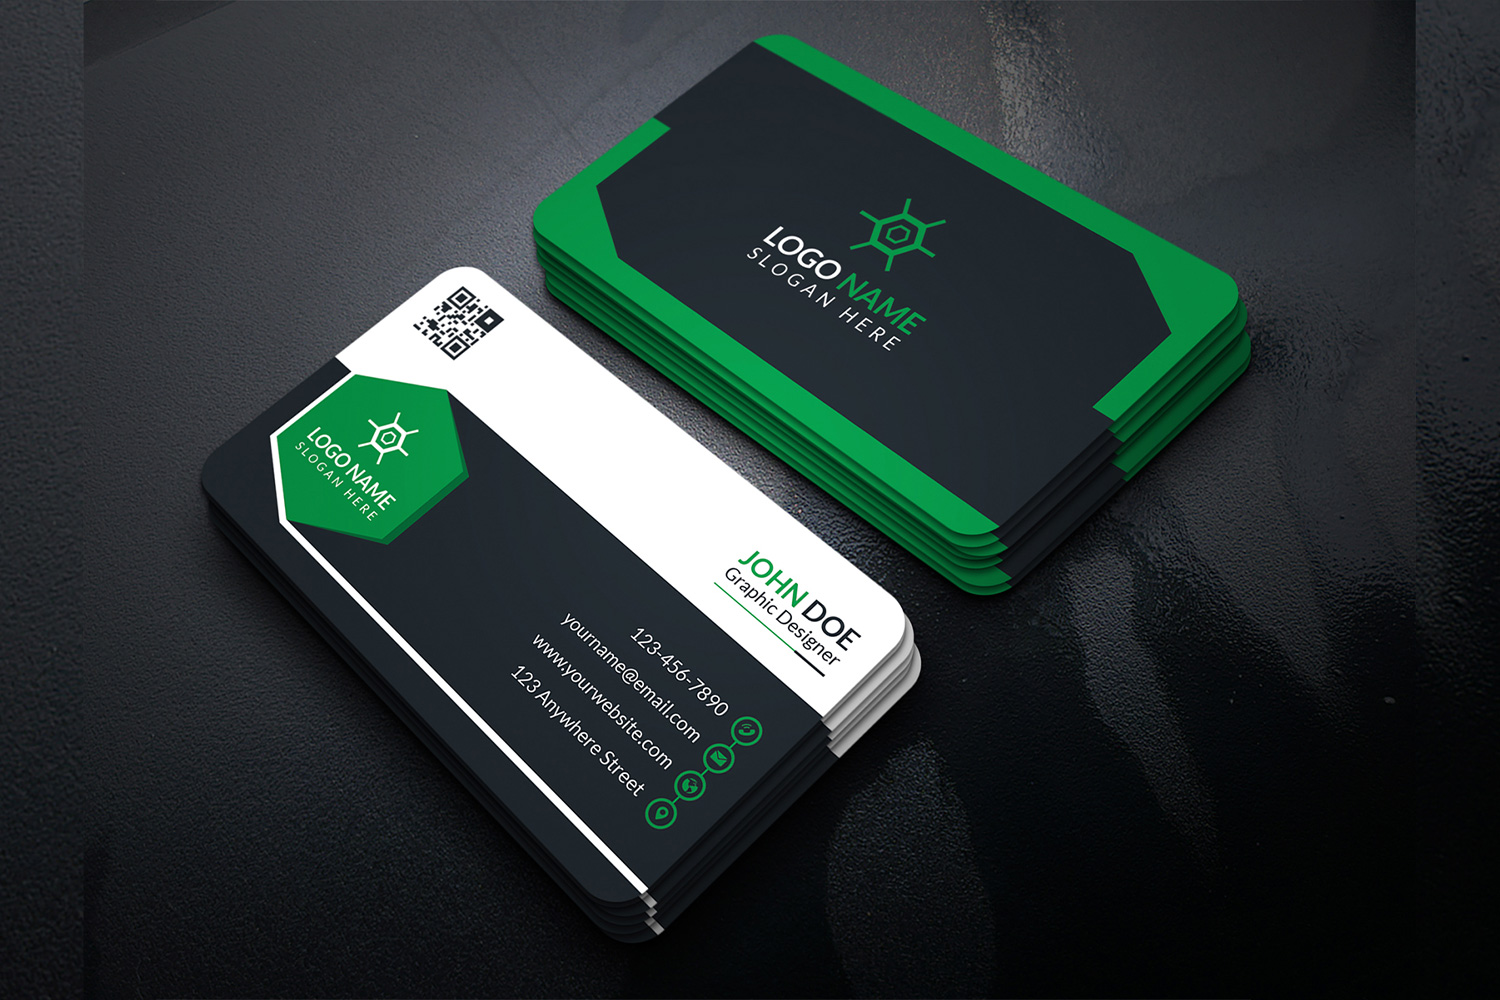 Stylish business cards in green and black colors.